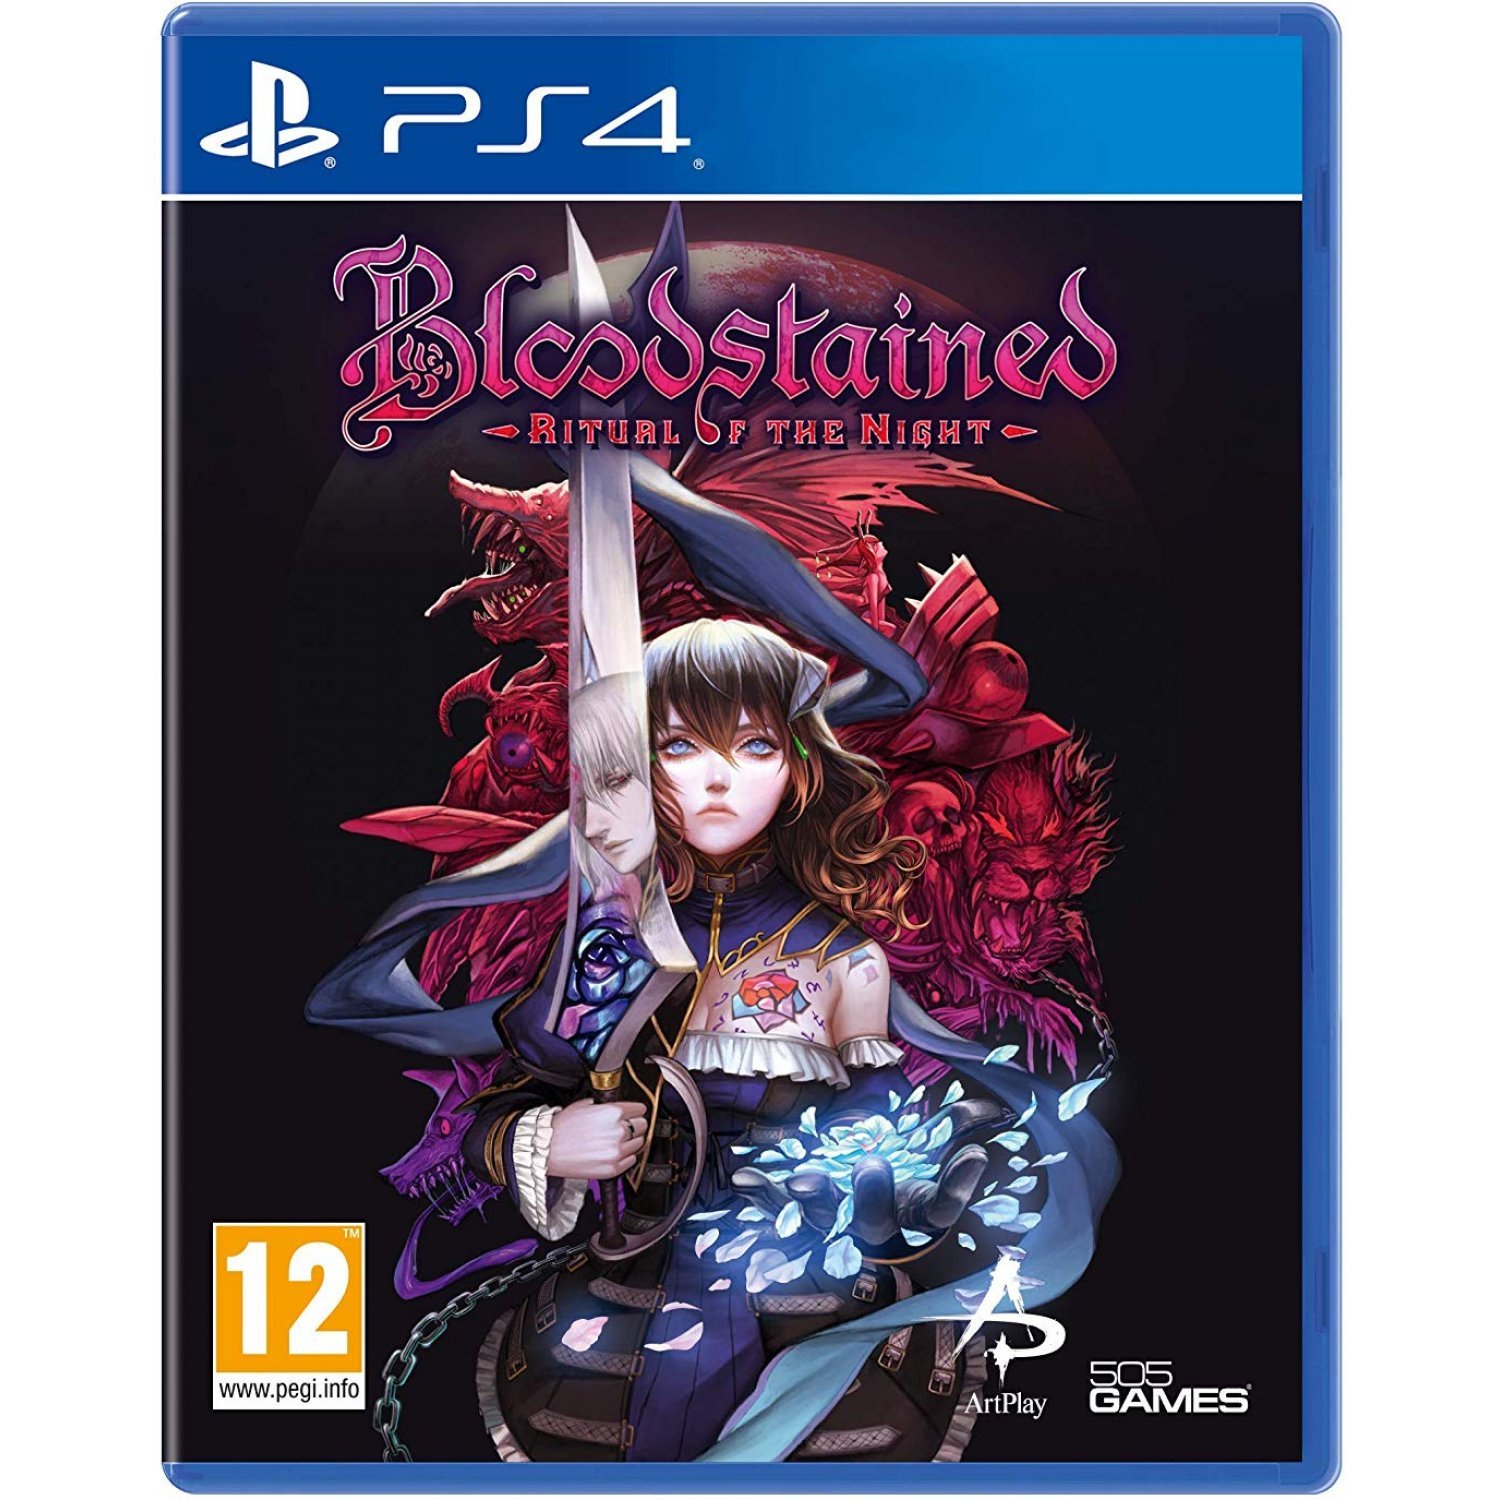 Bloodstained - Ritual of the Night von 505 Gamestreet